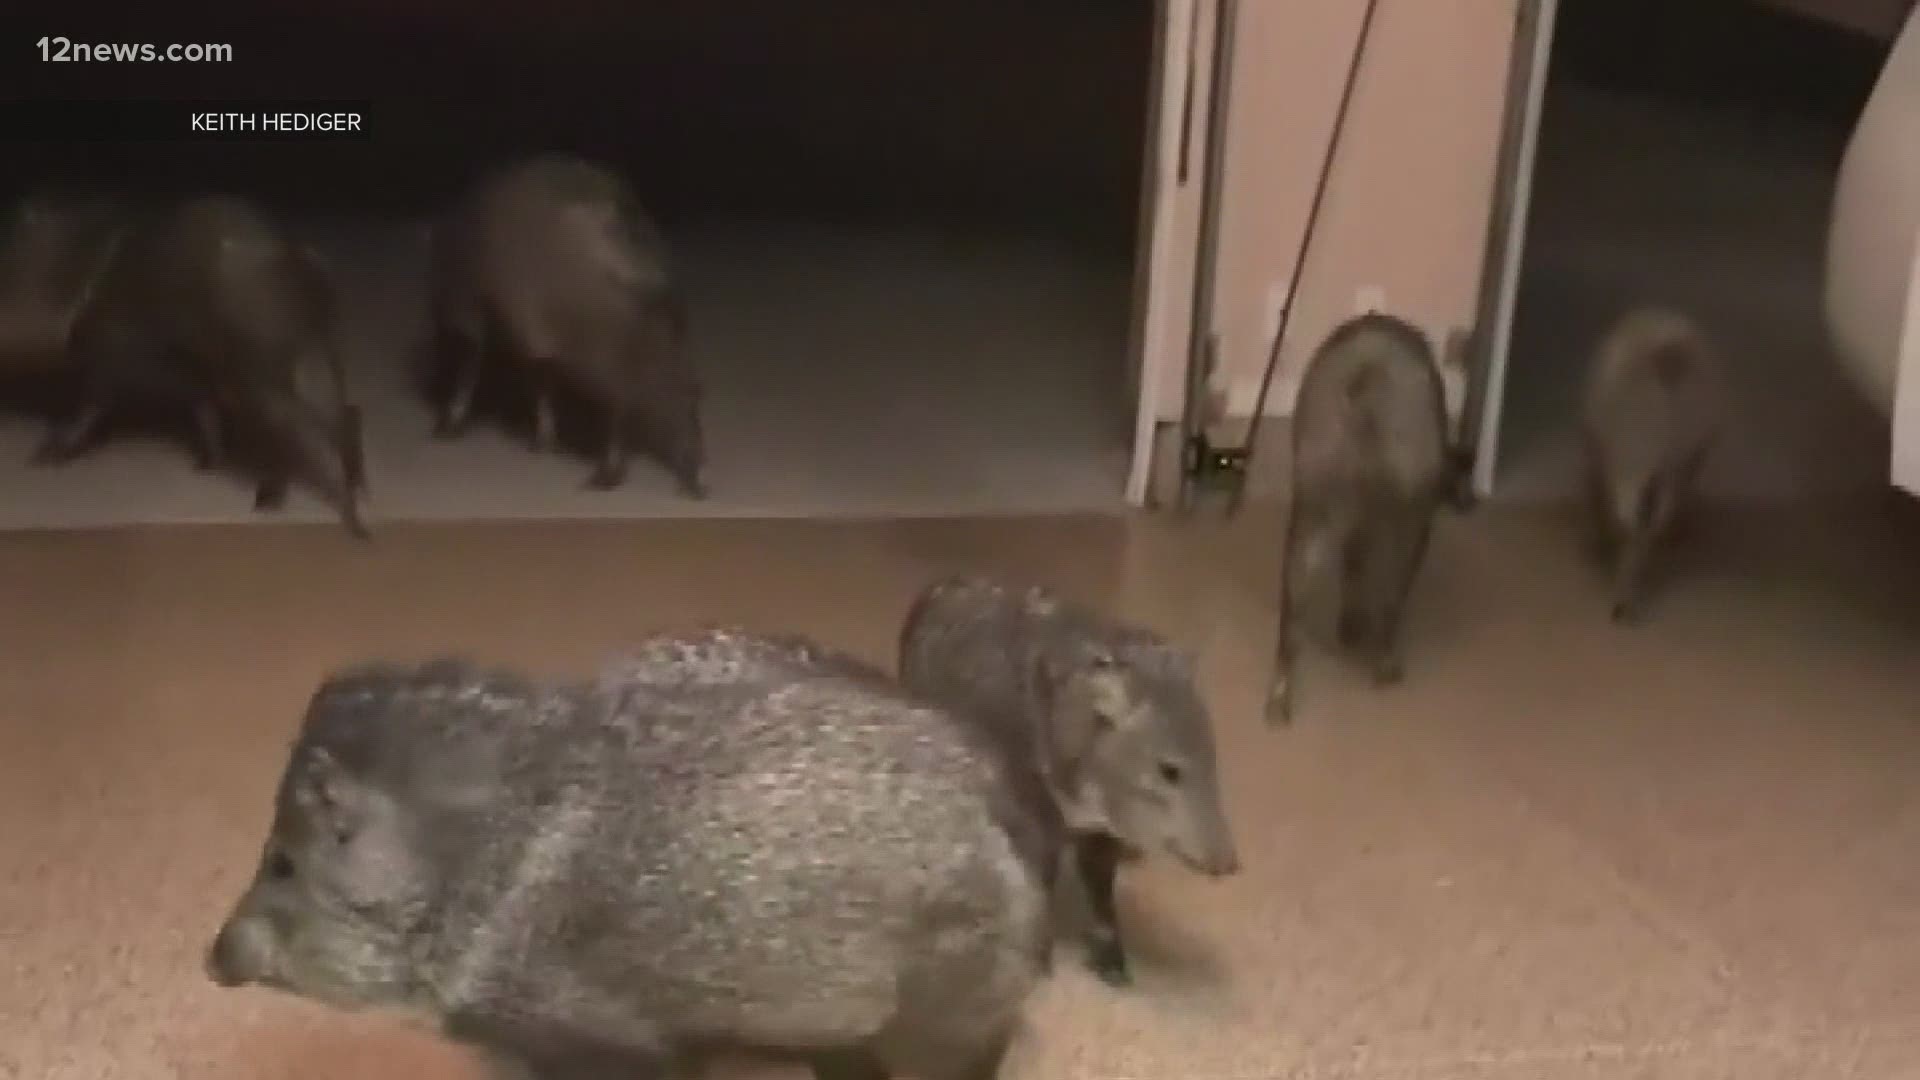 You may have seen some extra visitors in your neighborhood lately. More desert animals, including a squadron of javelina, are roaming closer to Valley homes.